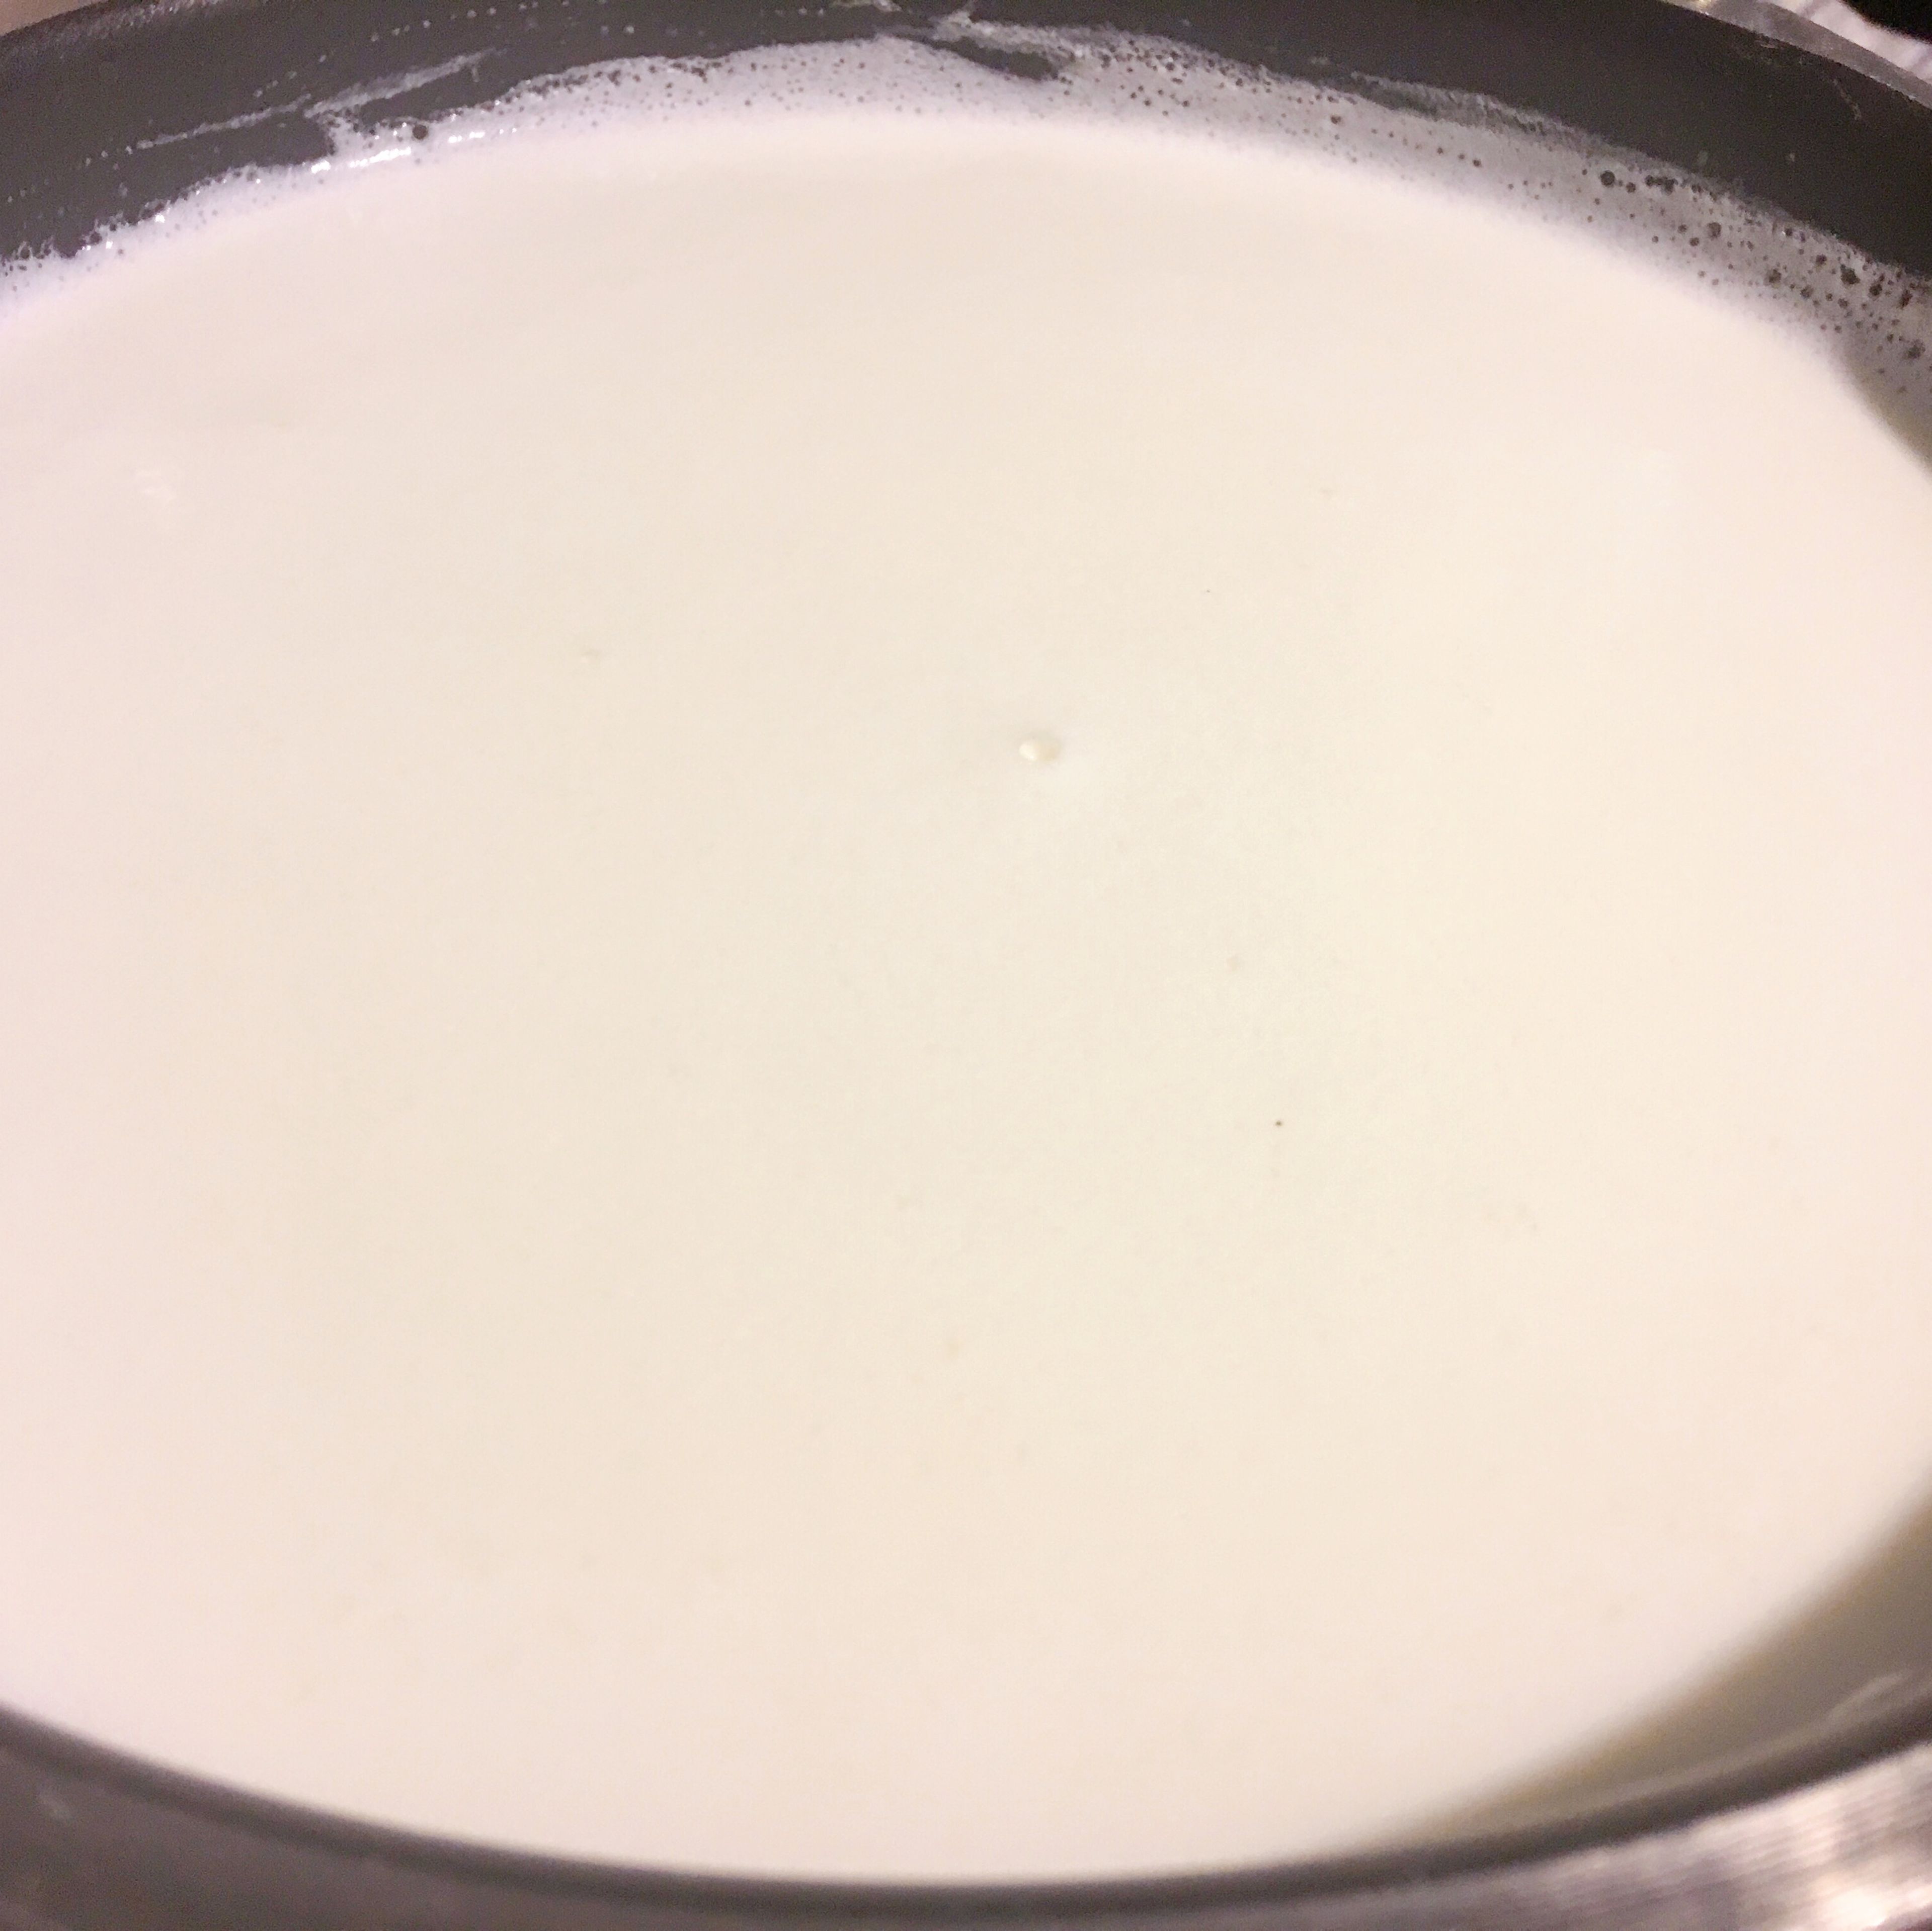 Pour whole milk into a pot. Heat slowly with medium-low heat and bring it to the boil. Make sure to stir it occasionally so that it doesn’t burn at the bottom of the pot.